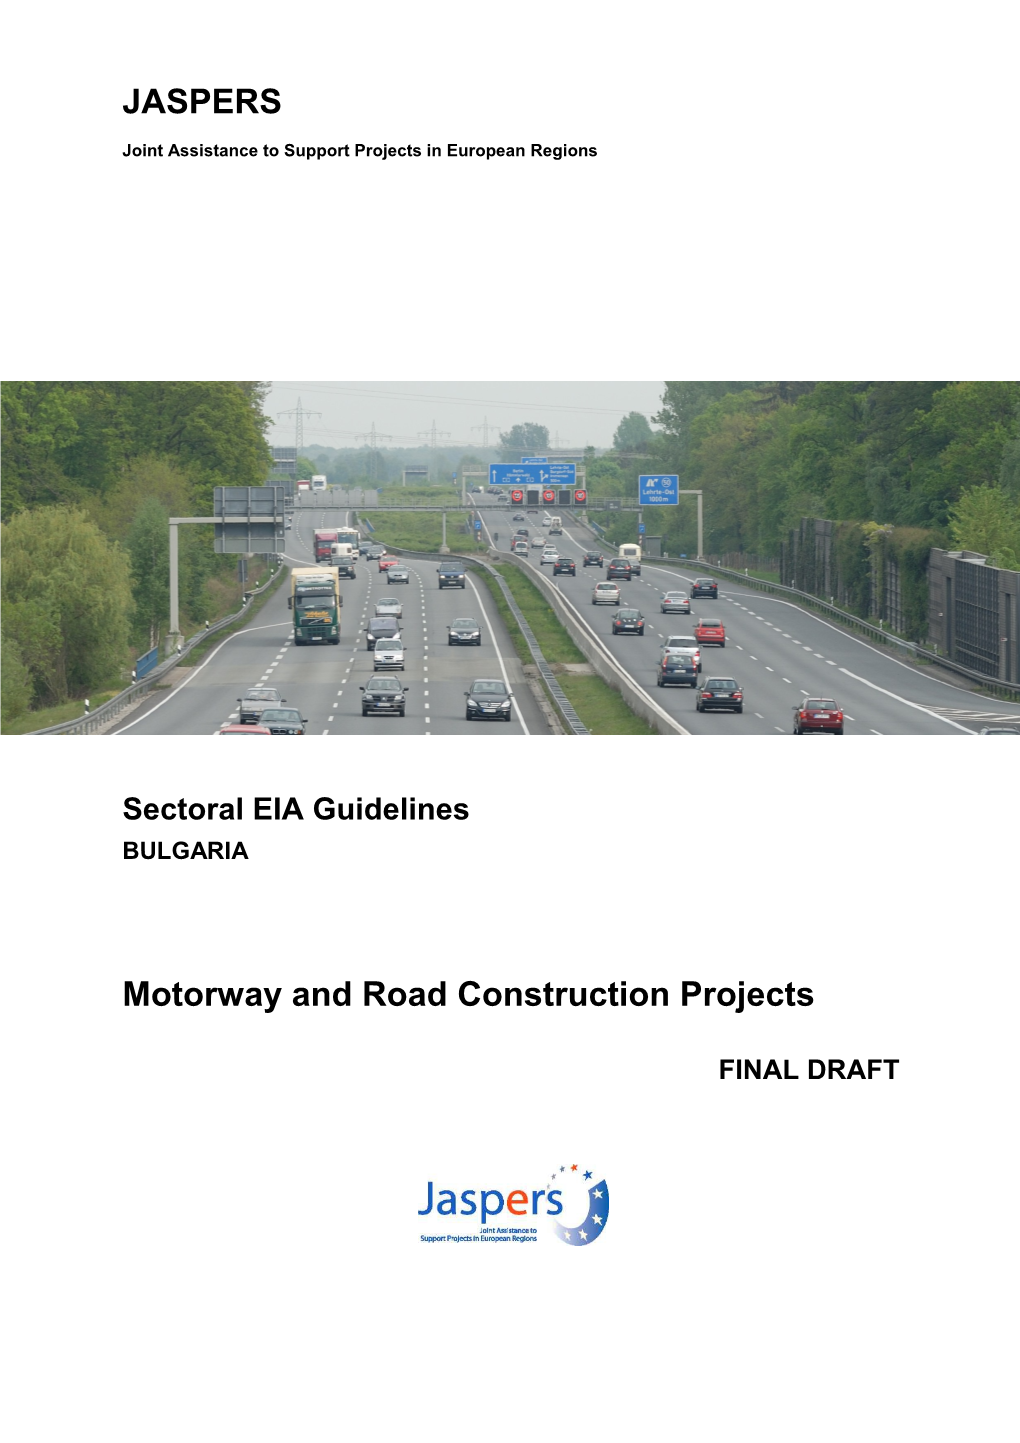 Motorway and Road Construction Projects